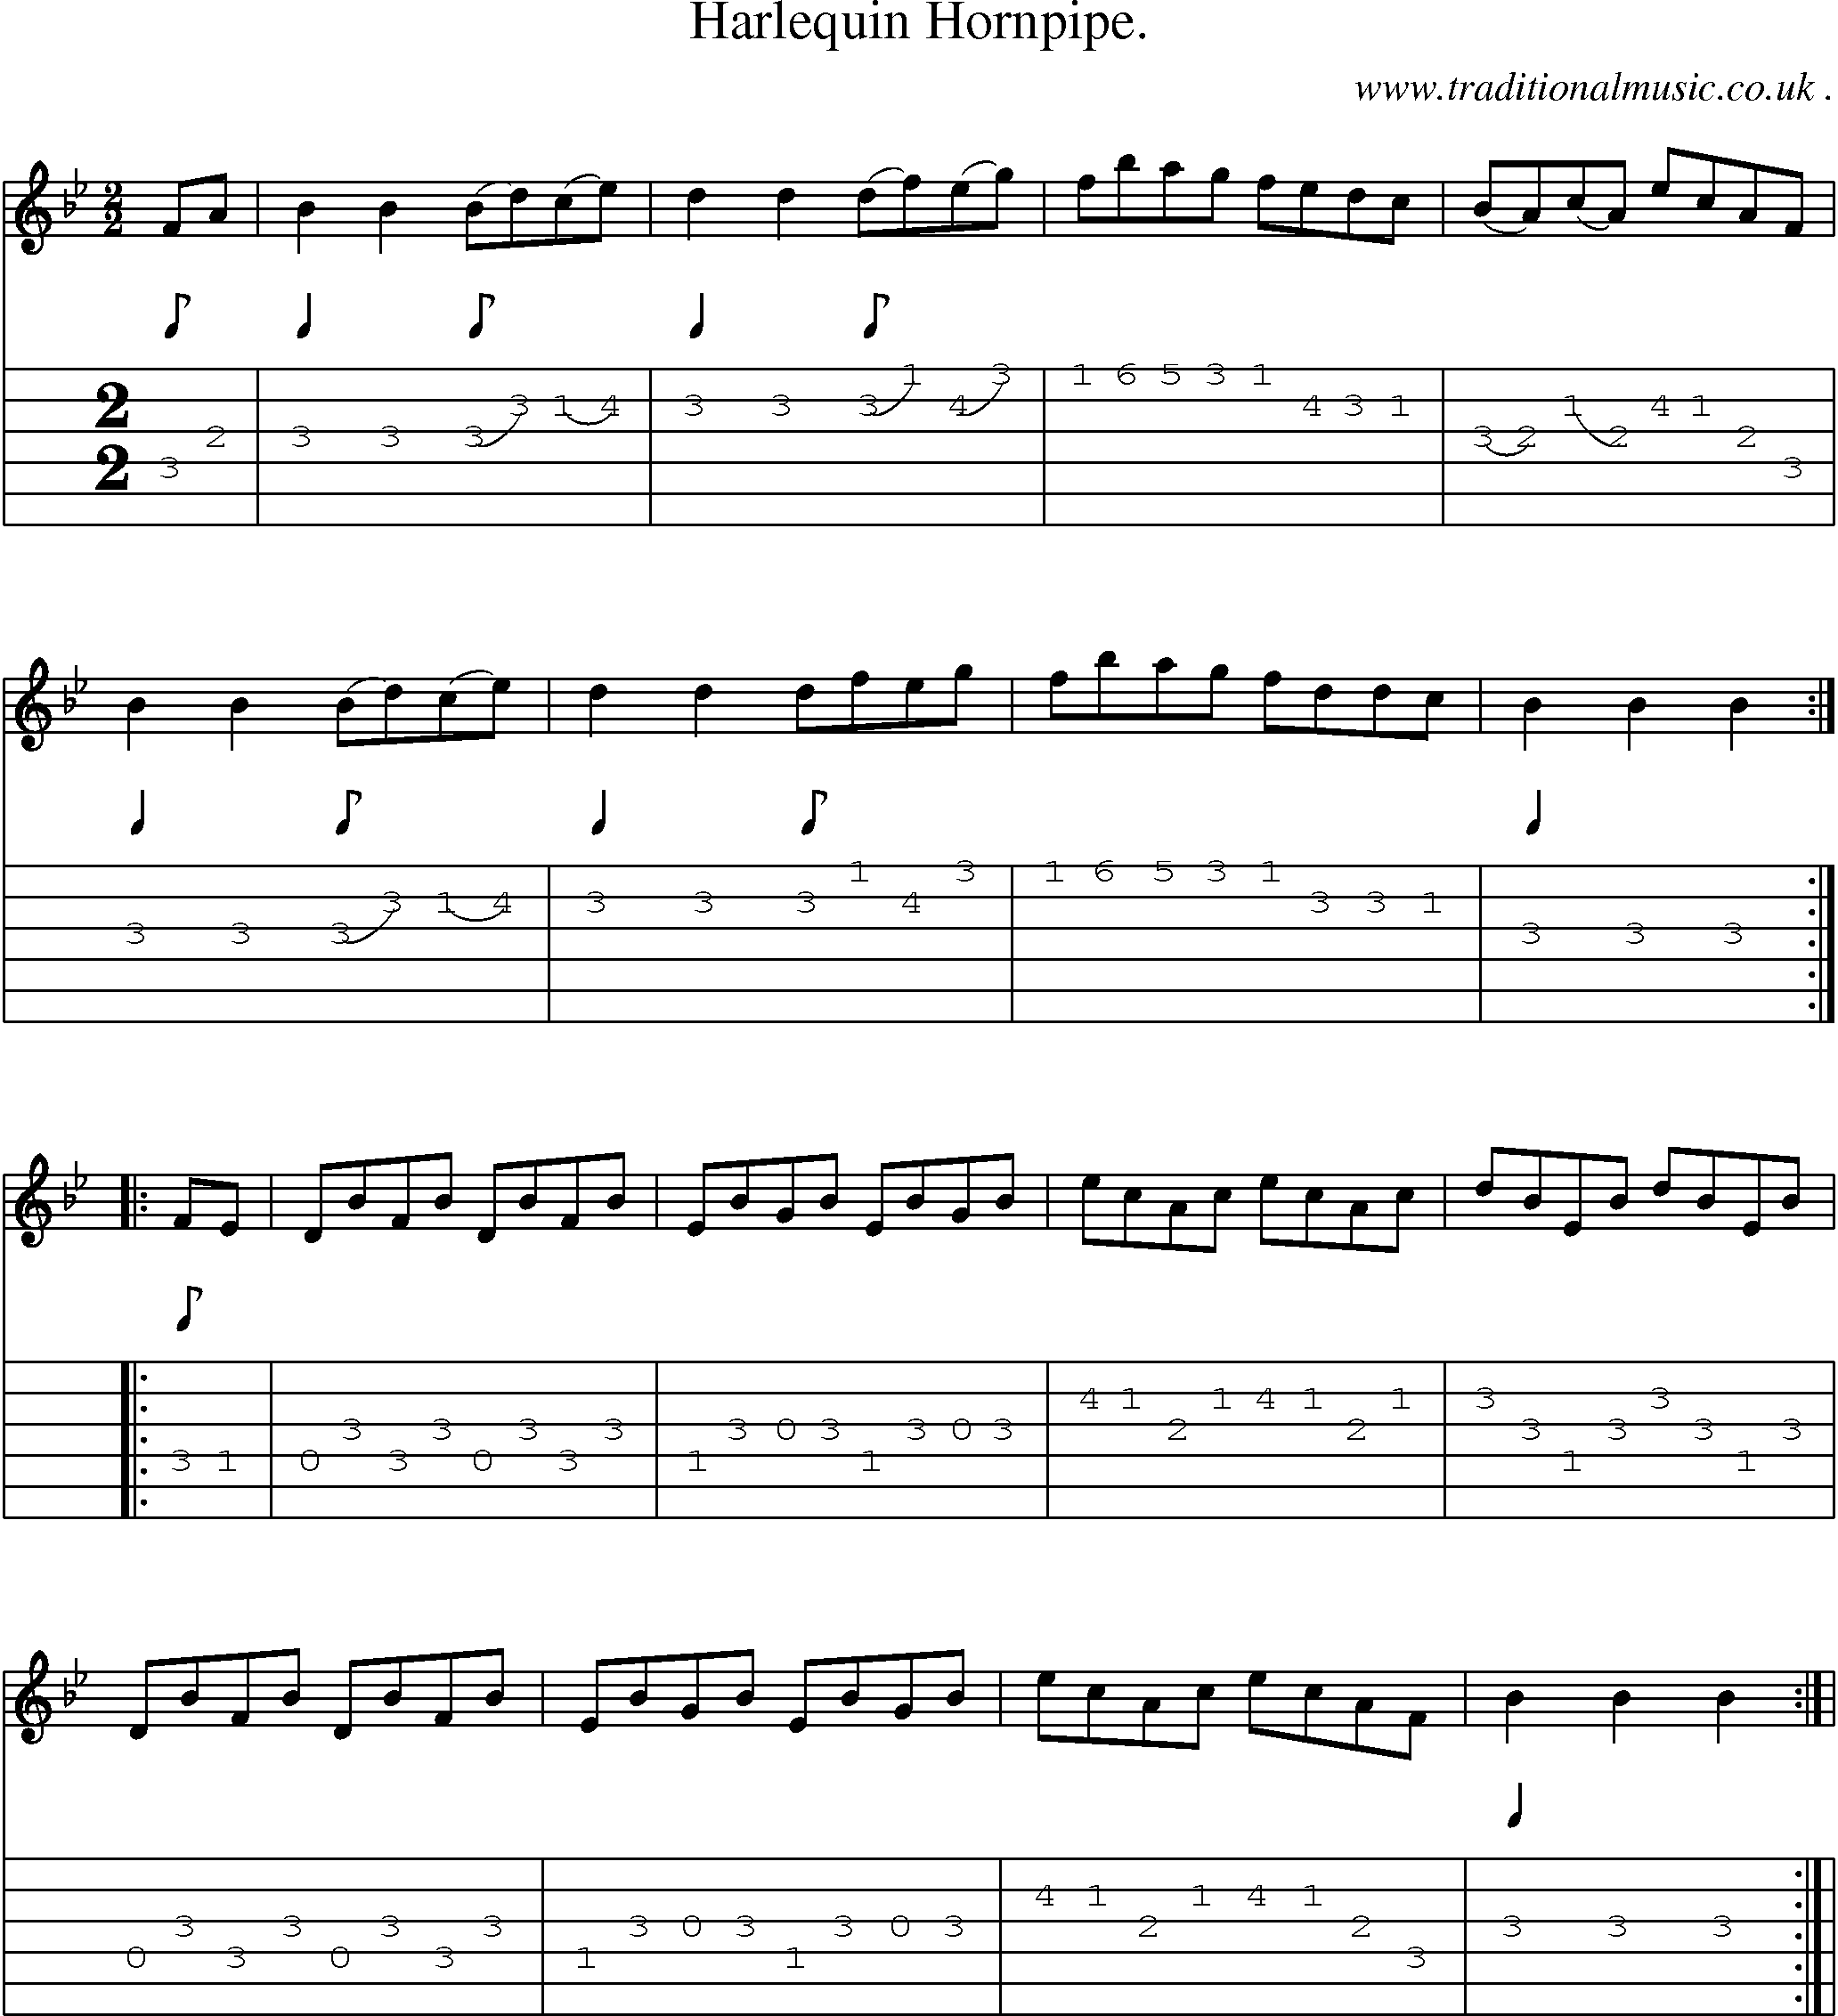 Sheet-Music and Guitar Tabs for Harlequin Hornpipe